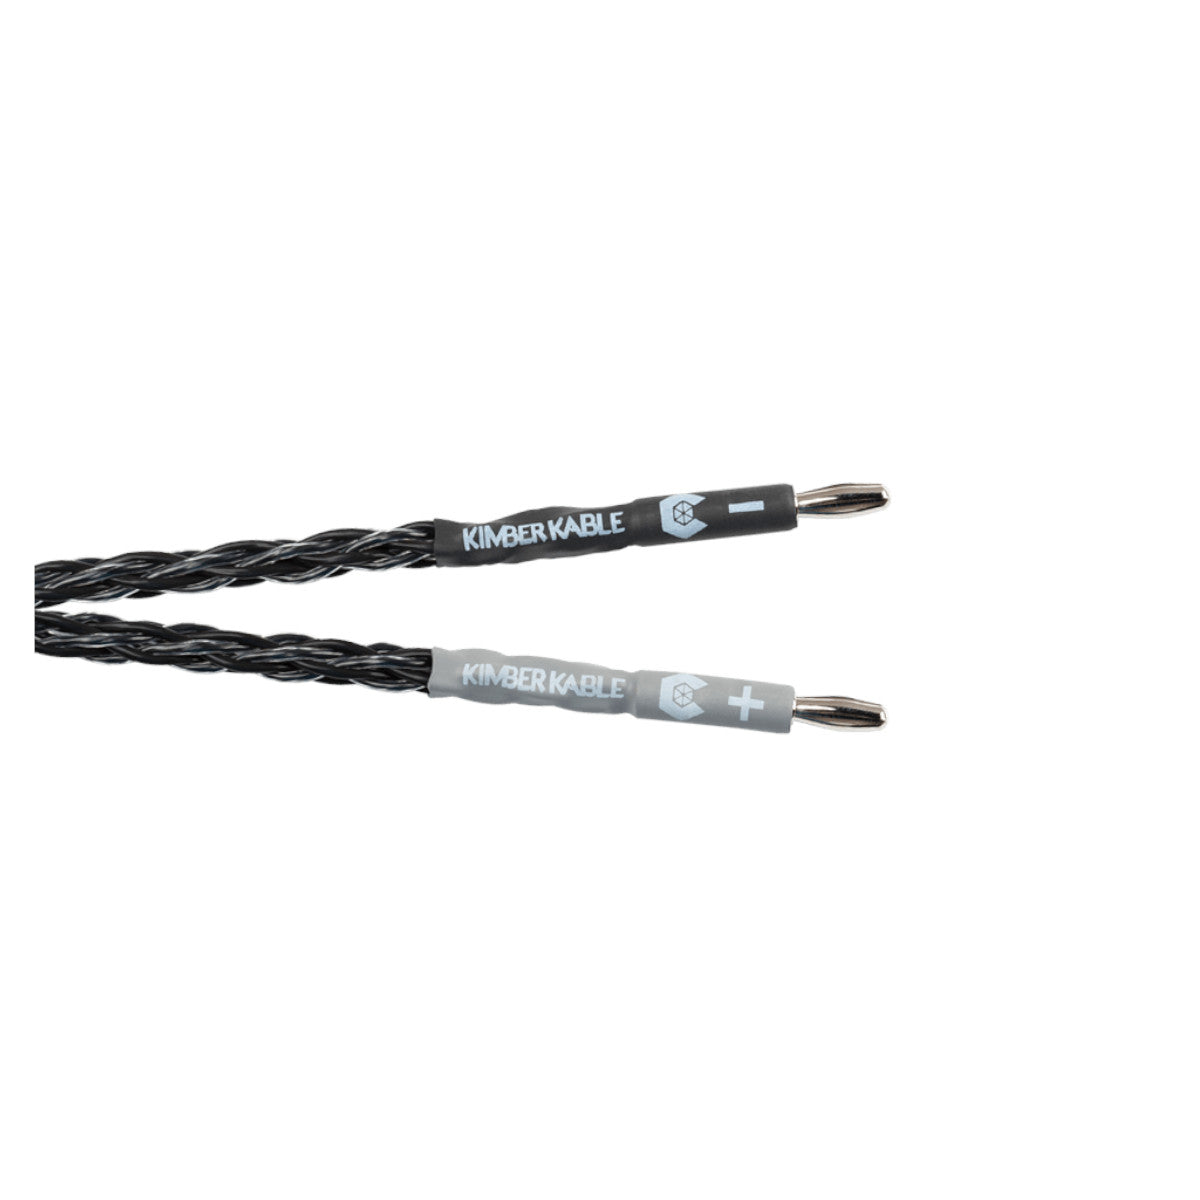 Kimber Kable Carbon 16 Speaker Cable (Terminated Pair) - Ooberpad India